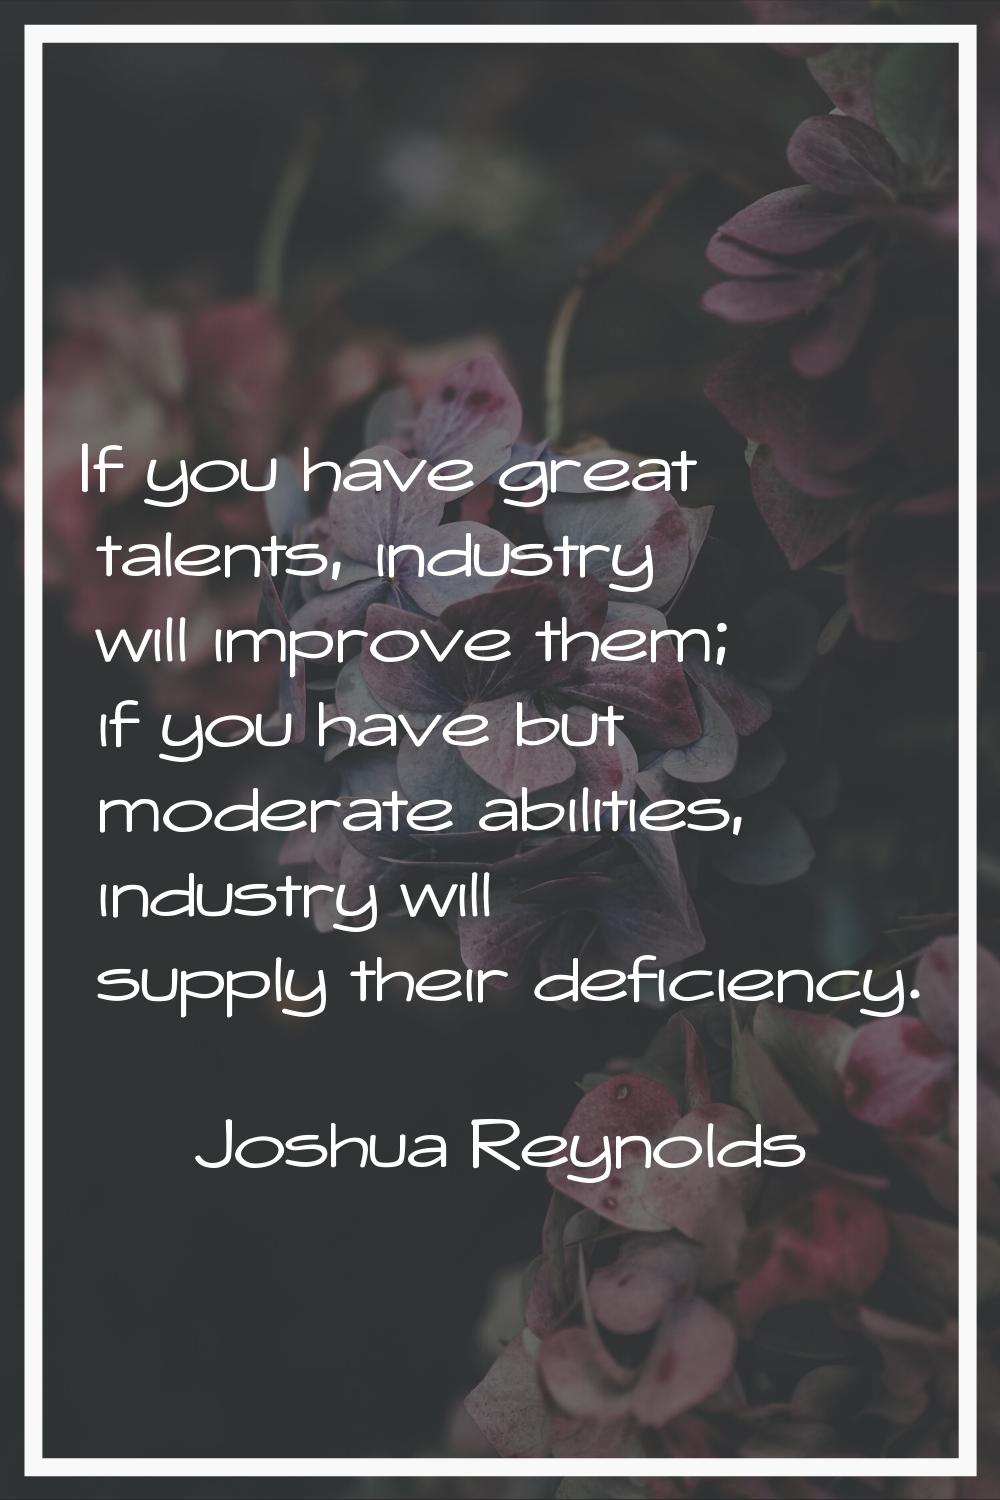 If you have great talents, industry will improve them; if you have but moderate abilities, industry